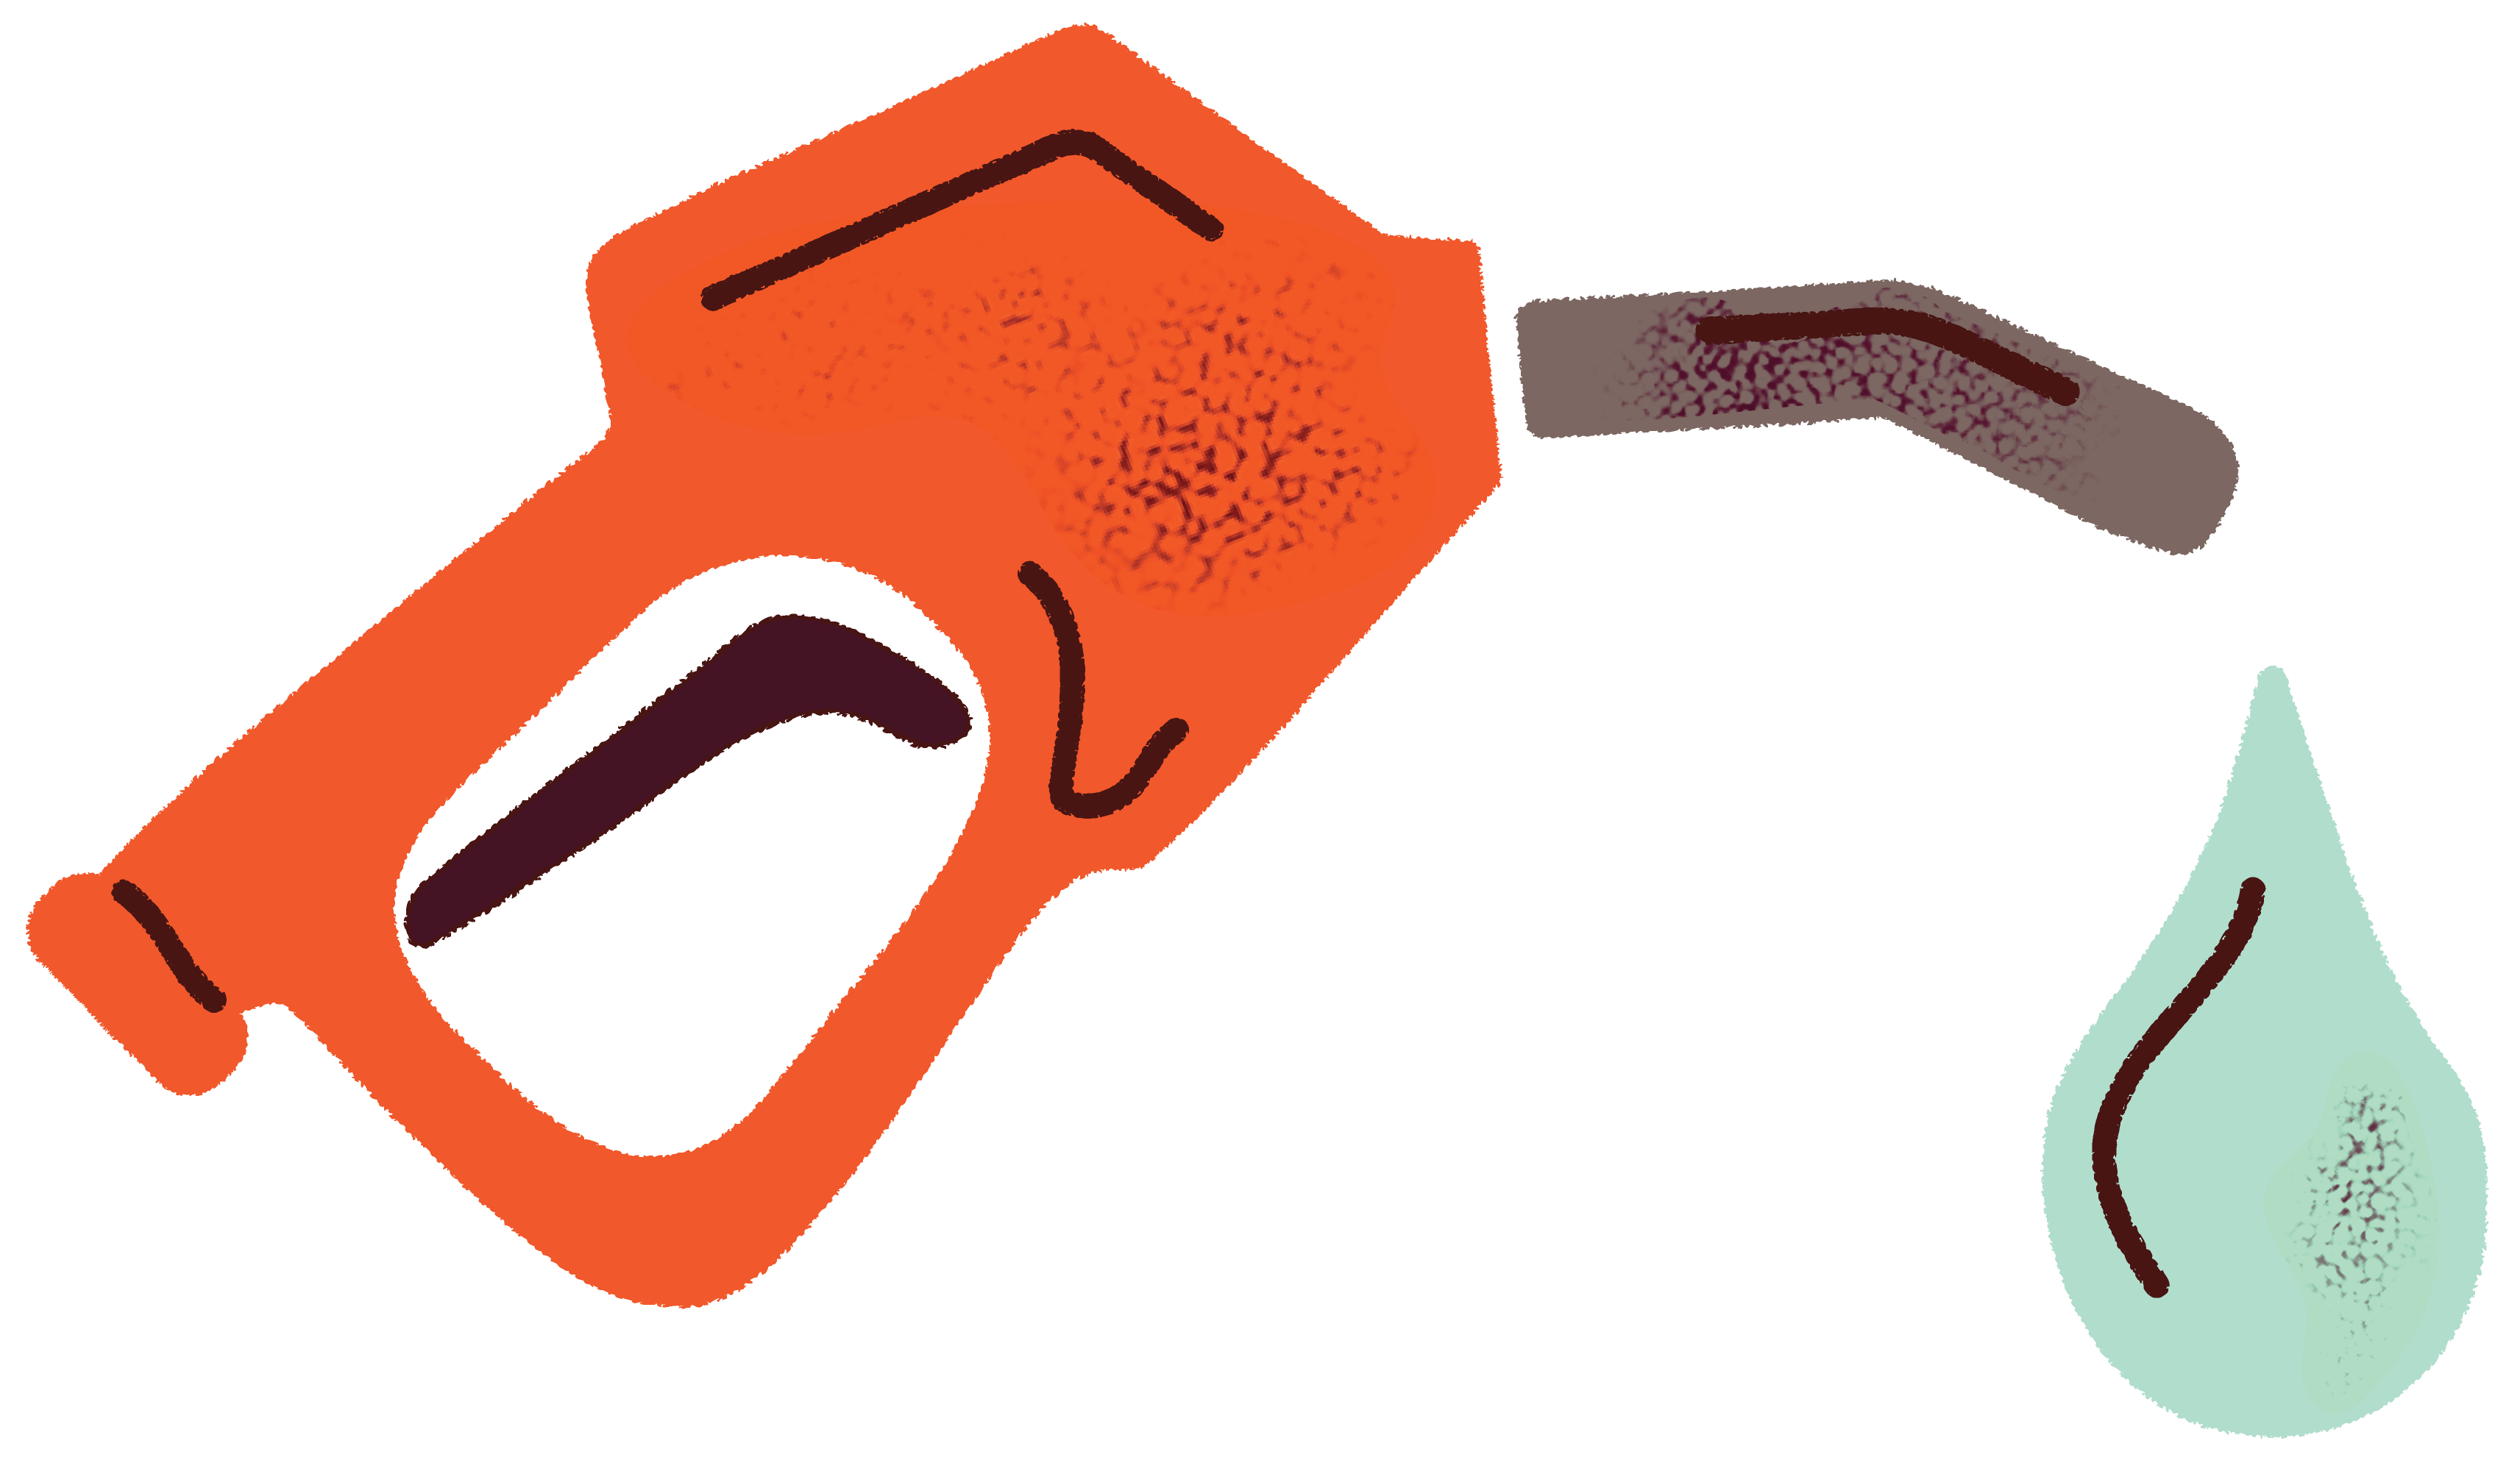 illustration of a gas pump handle with a drop of gas coming out of the nozzle.